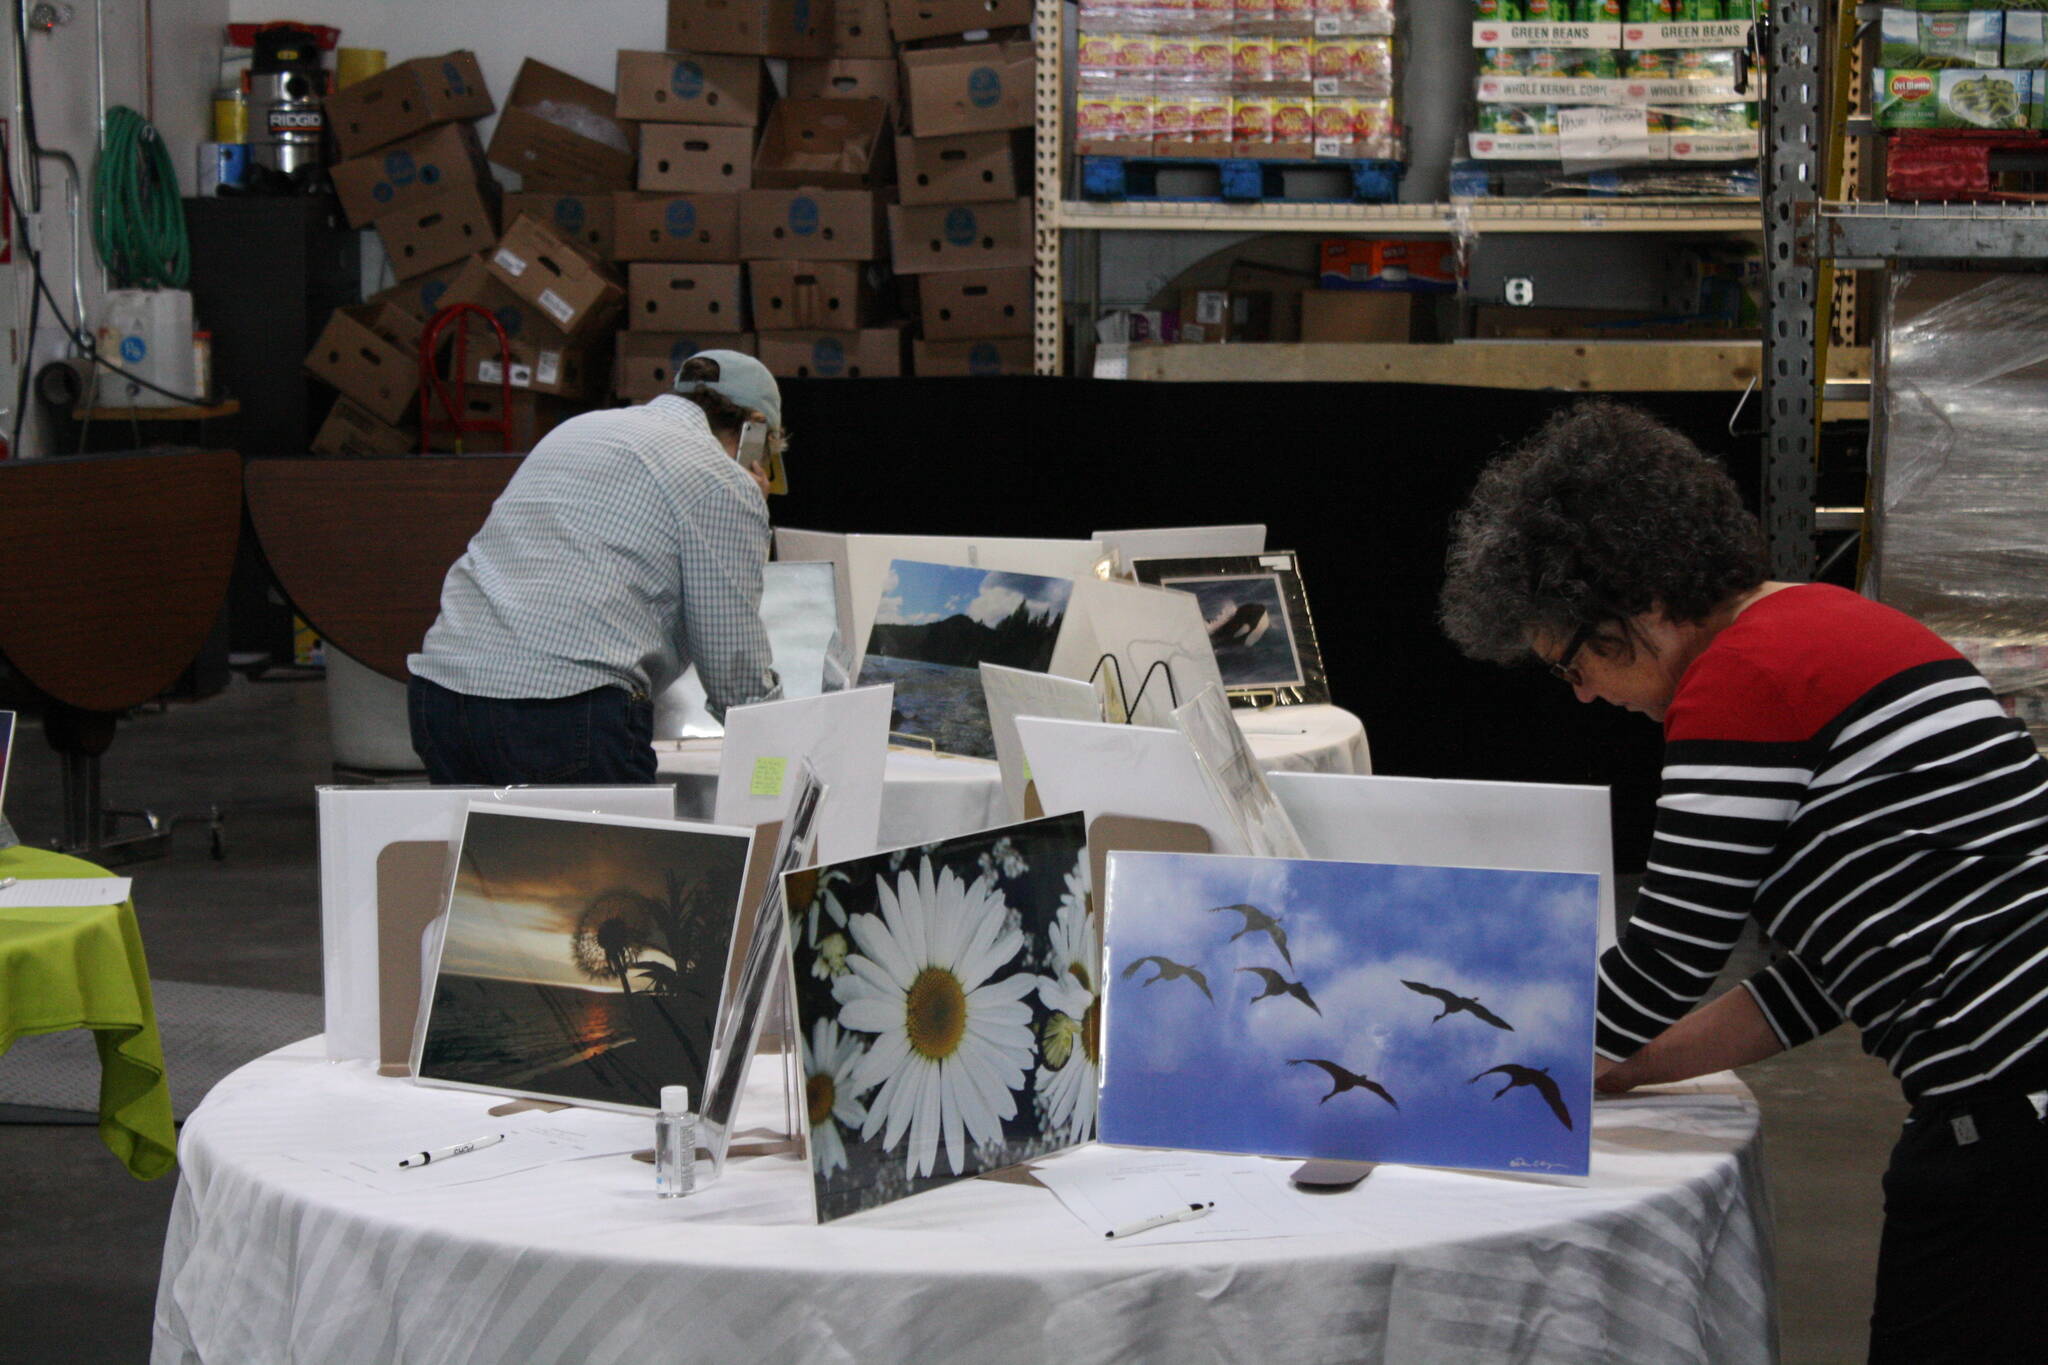 Artwork up for auction is displayed at the Kenai Peninsula Food Bank as part of its Spring Festival celebration on Thursday, June 16, 2022. (Camille Botello/Peninsula Clarion)